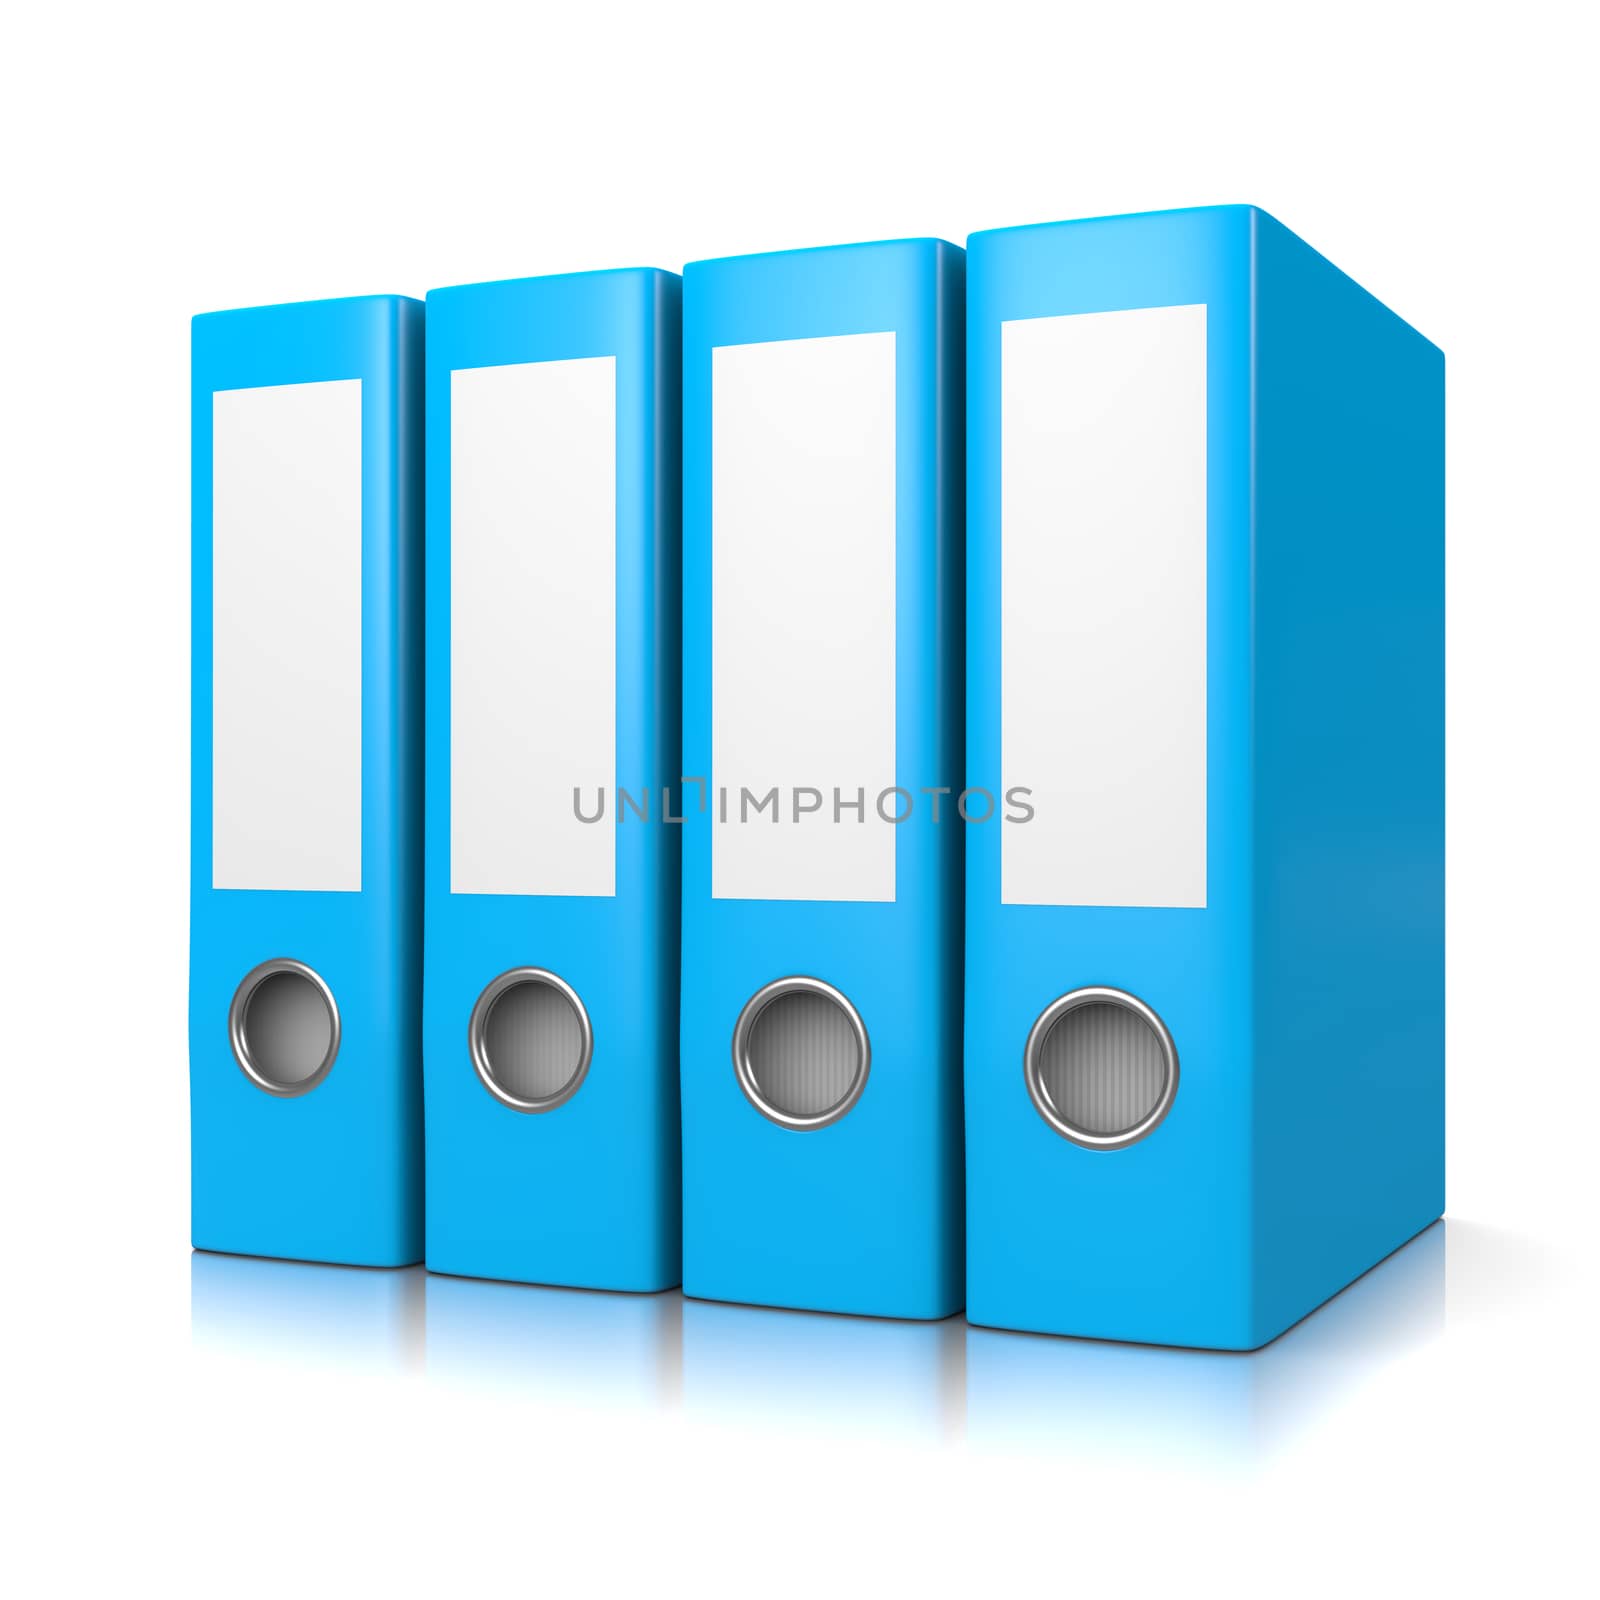 Set of Four Blue Binders Isolated on White Background 3D Illustration